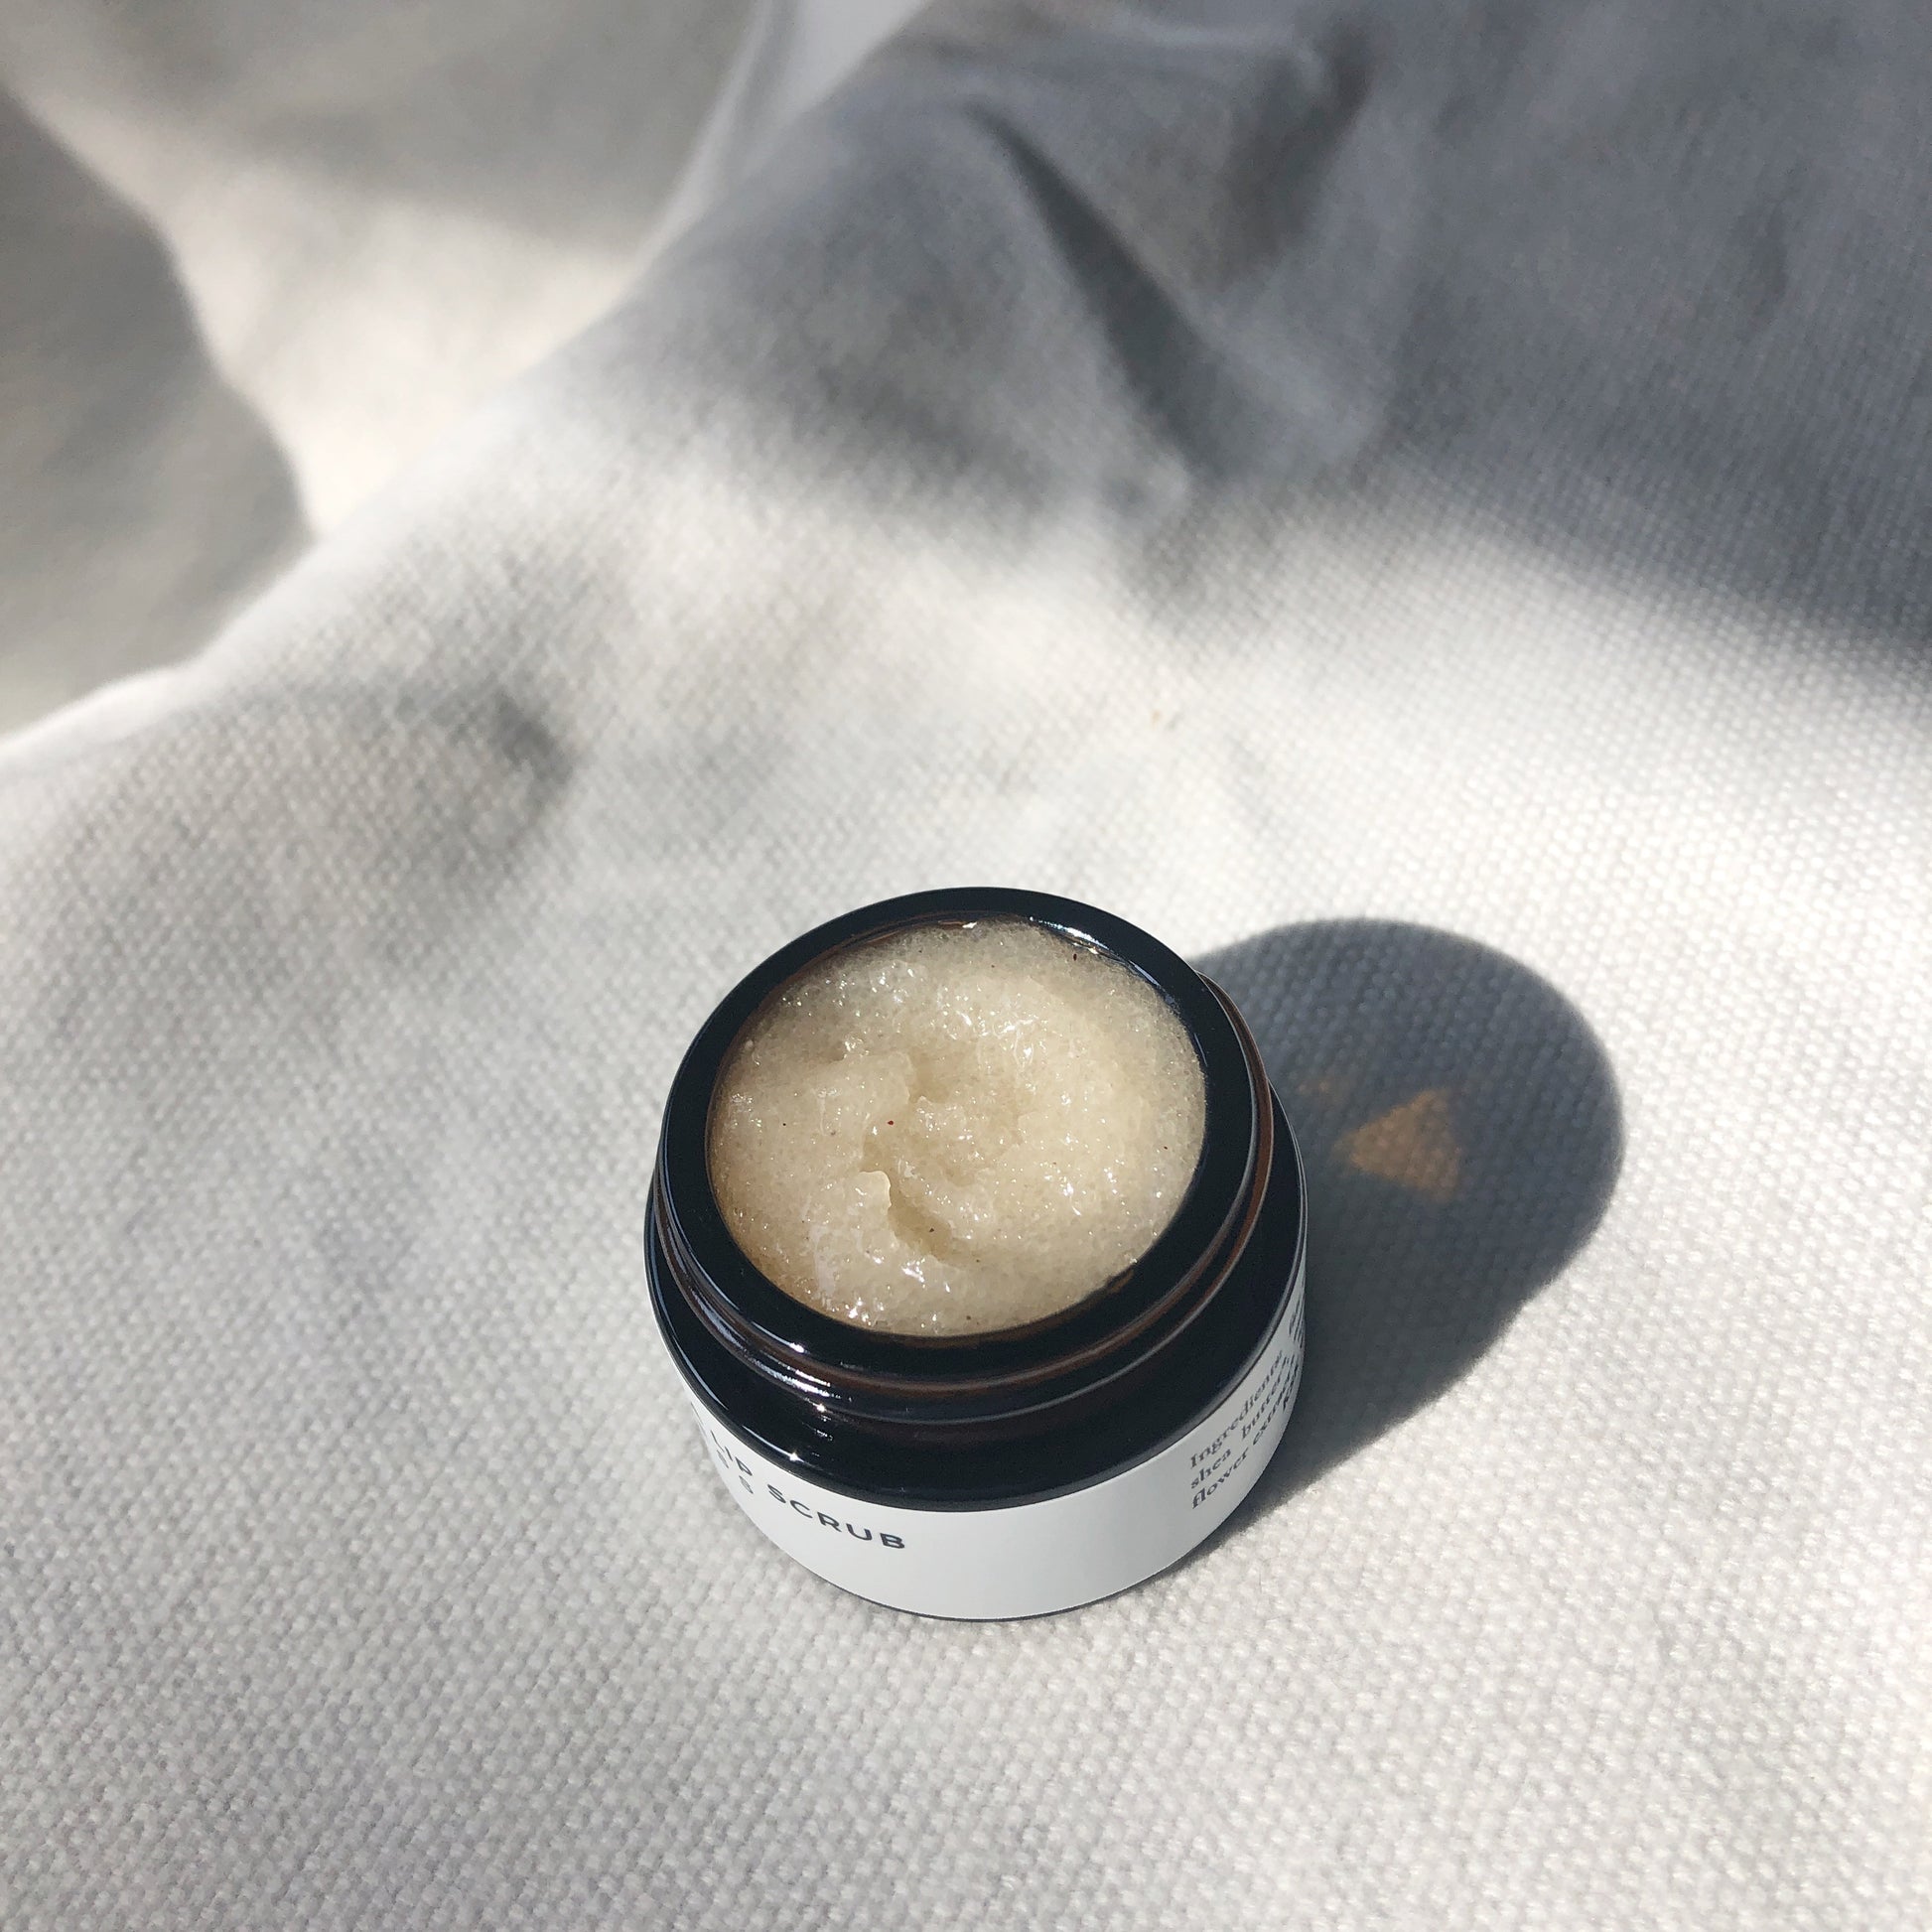 A weekly sugar lip scrub to gently exfoliate dead skin cells to reveal soft smooth lips. Dual power action with Papaya extracts is a natural enzymic exfoliator gently sloths away dull dry skin.